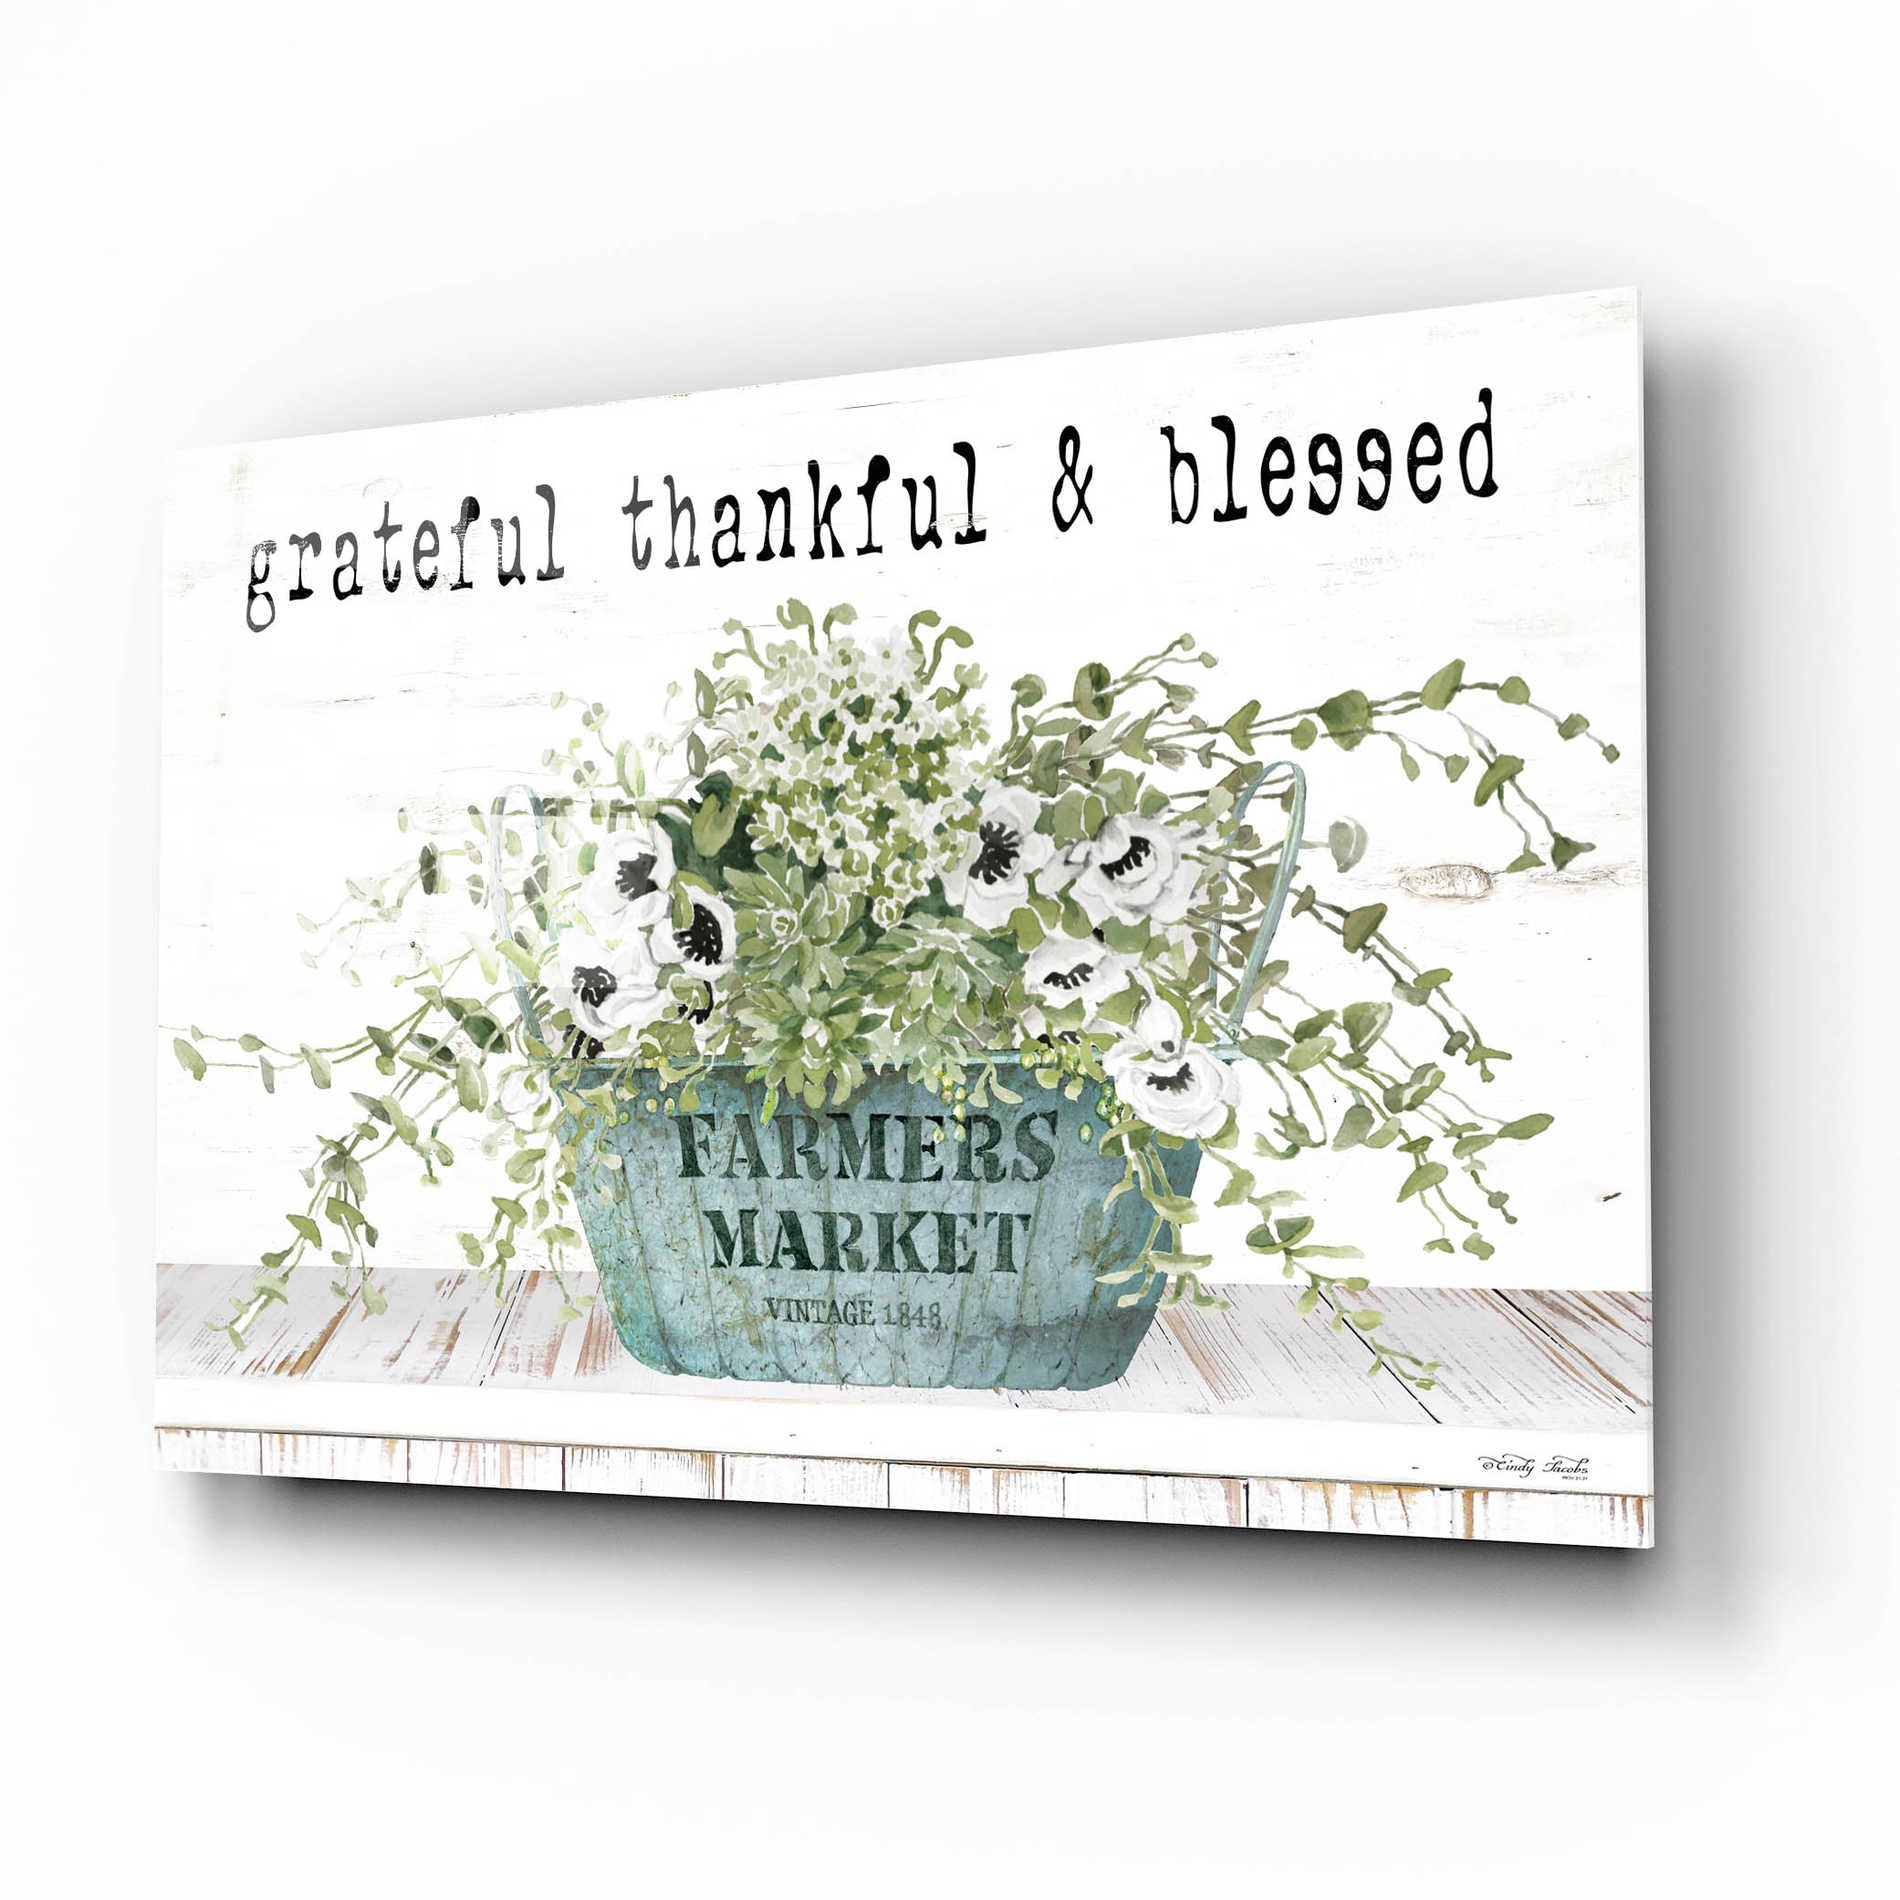 Epic Art 'Grateful Thankful & Blessed' by Cindy Jacobs, Acrylic Glass Wall Art,16x12